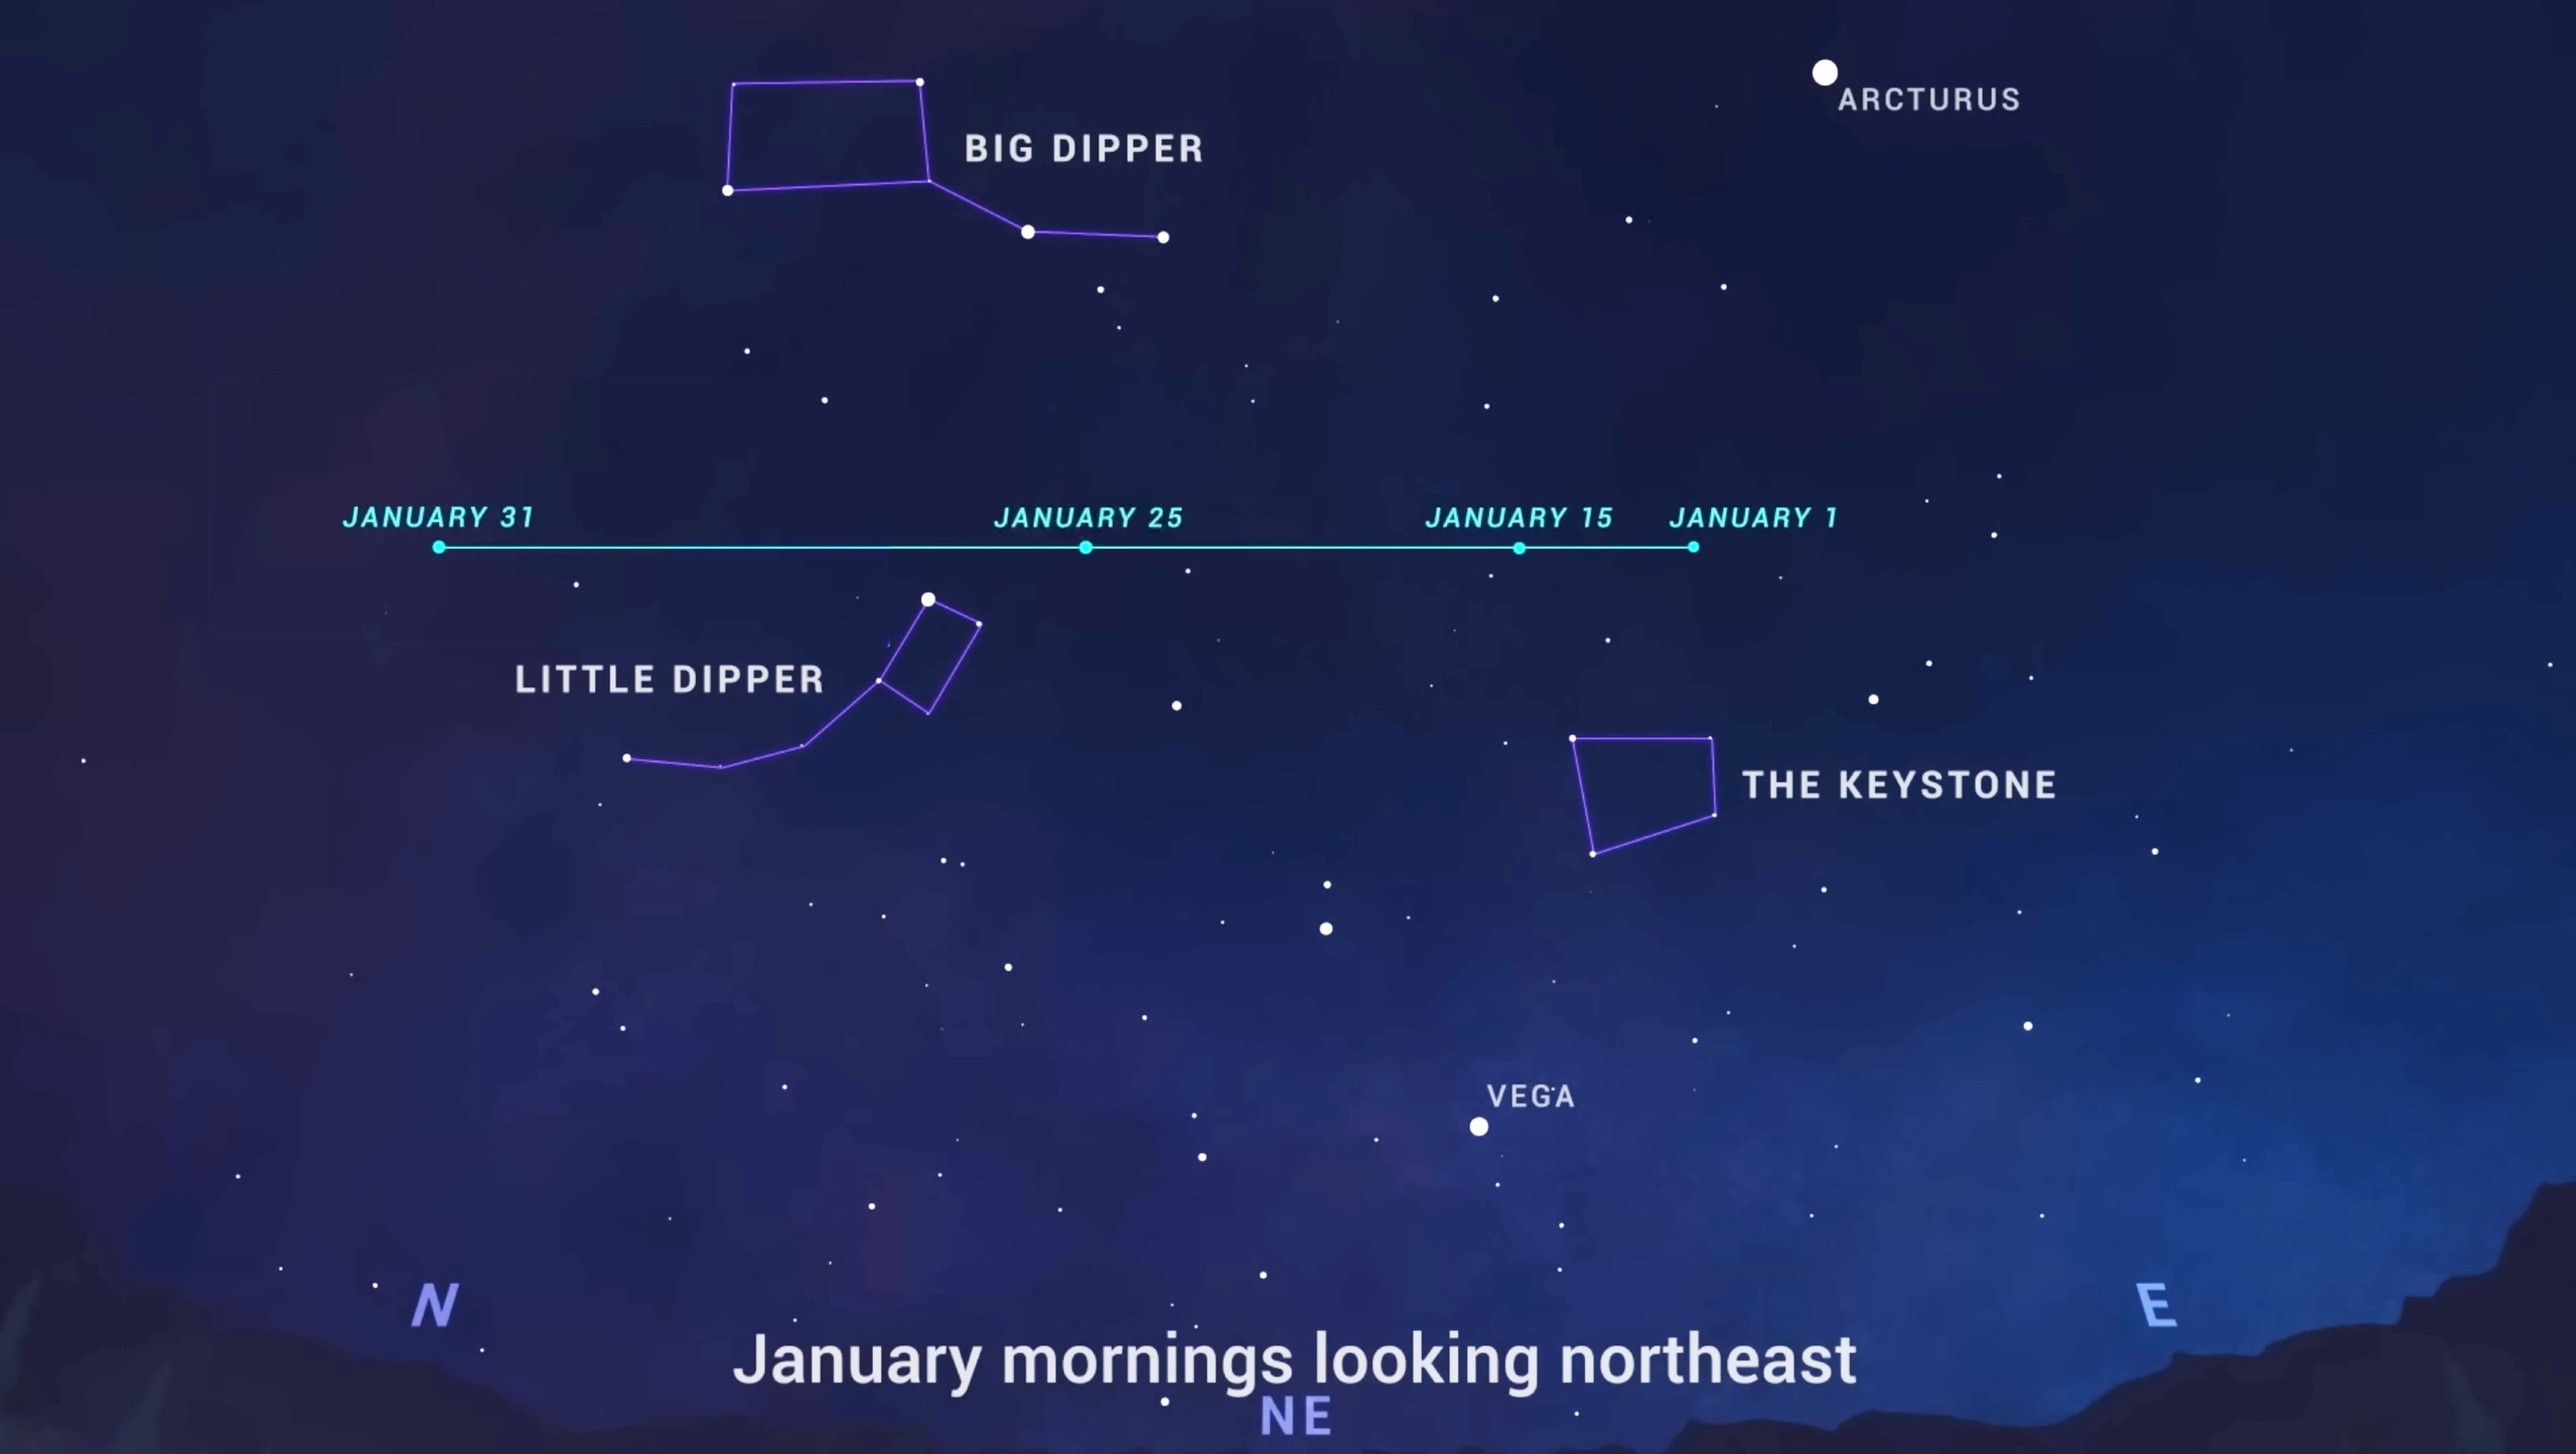 A NASA image showing the path of comet C/2022 E3 ZTF in the January sky for the Northern Hemisphere.